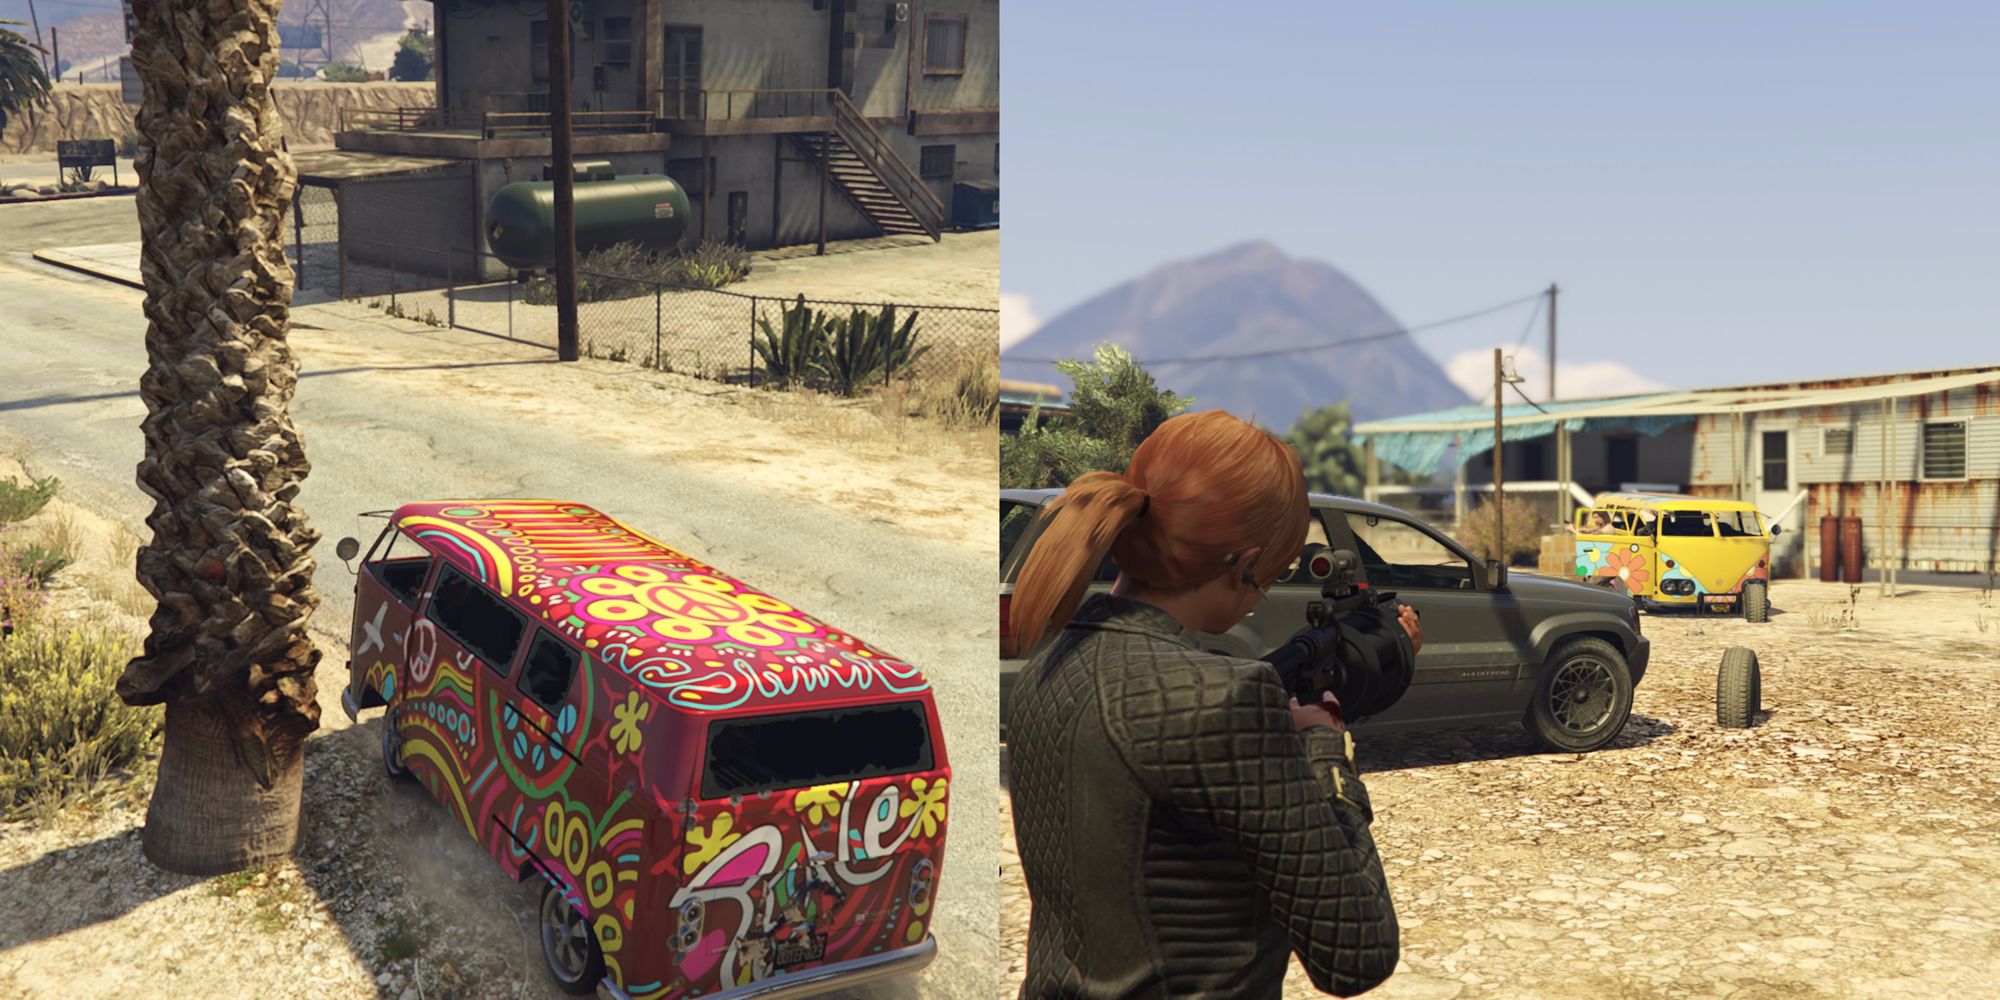 Split image of a colorful van and a person firing a gun